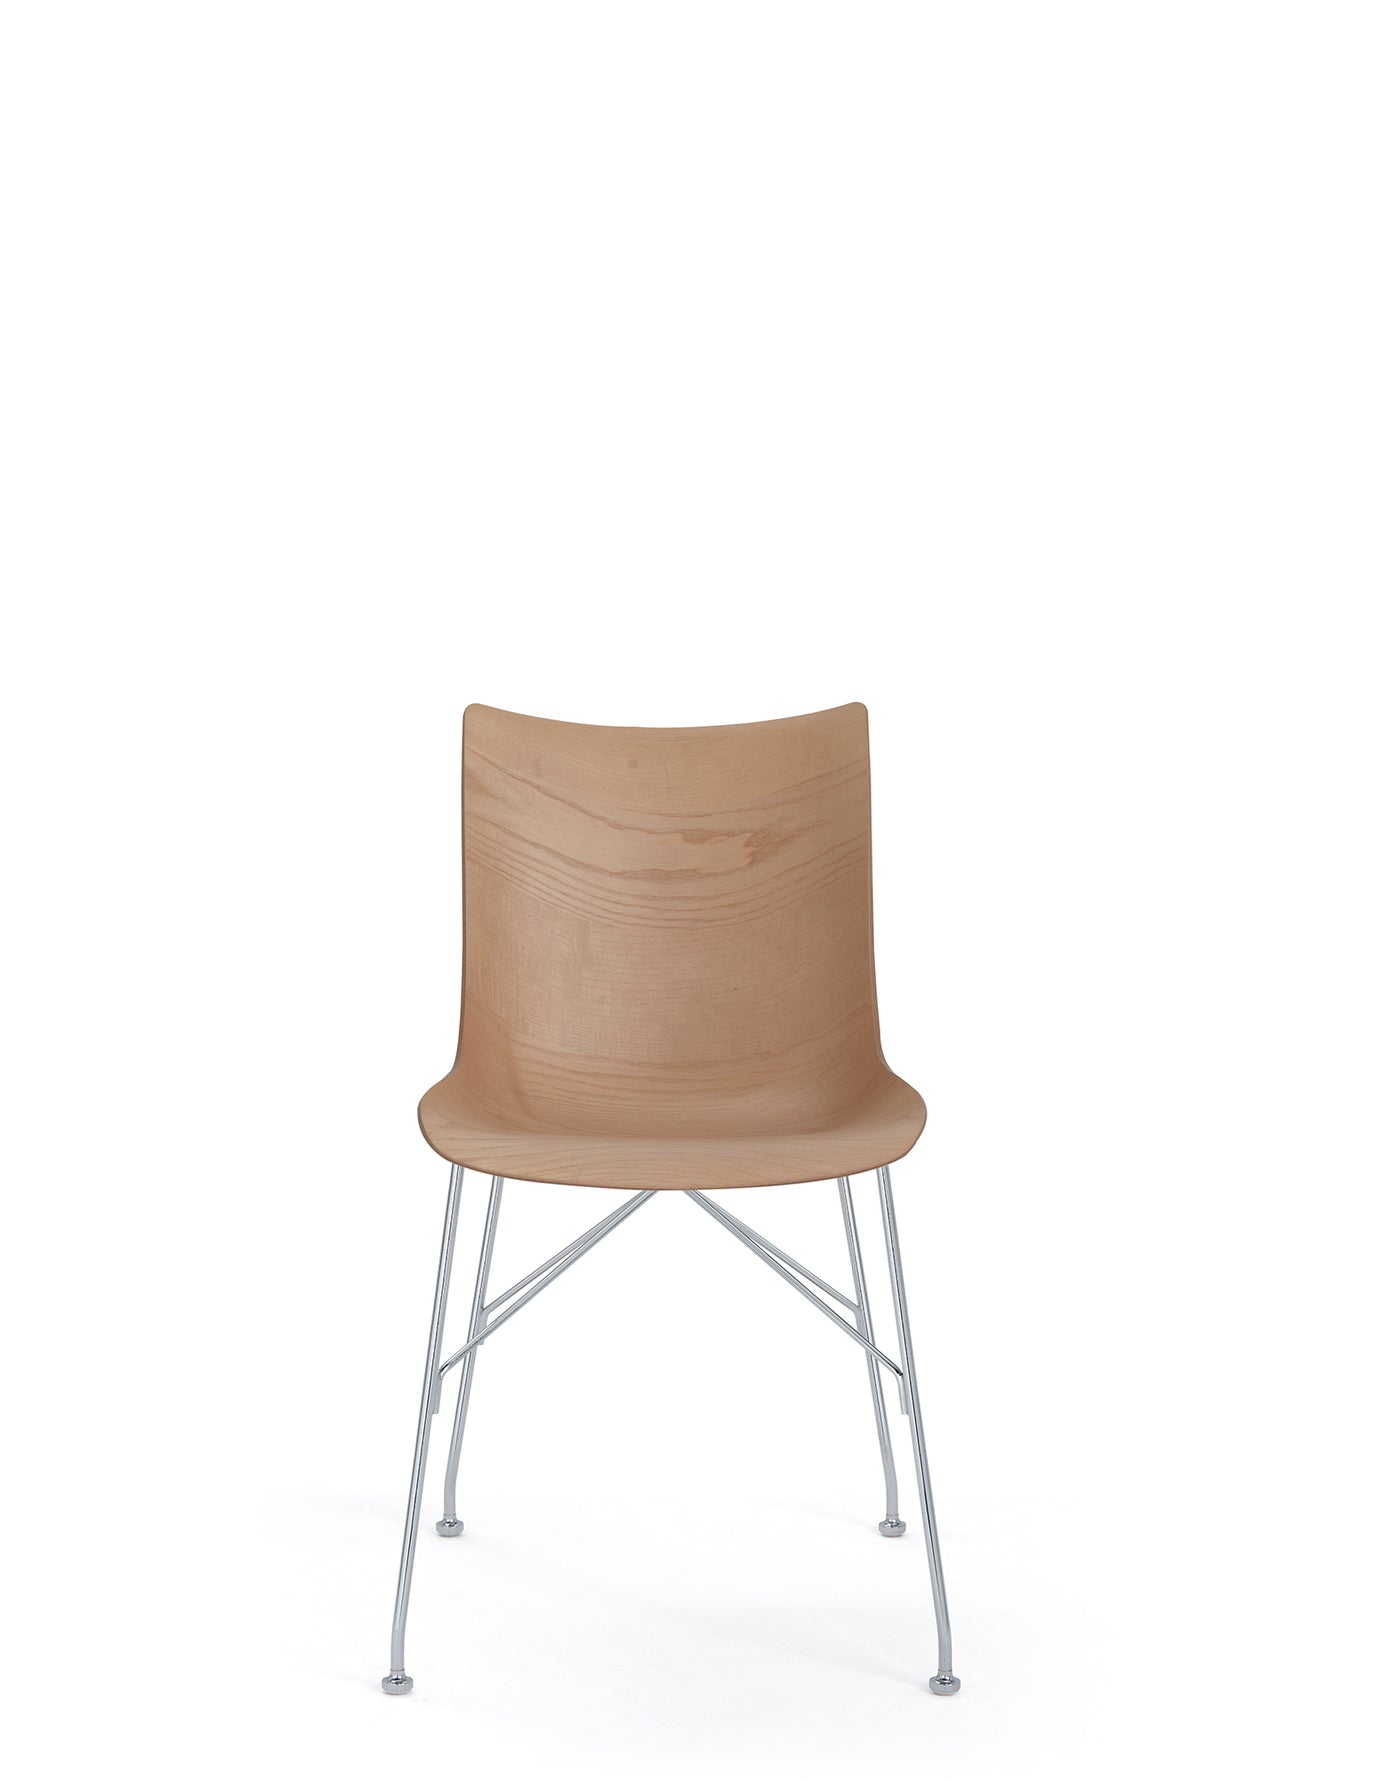 POLTR. P/WOOD CHAIR ST.CROMO  SLATTED ASH